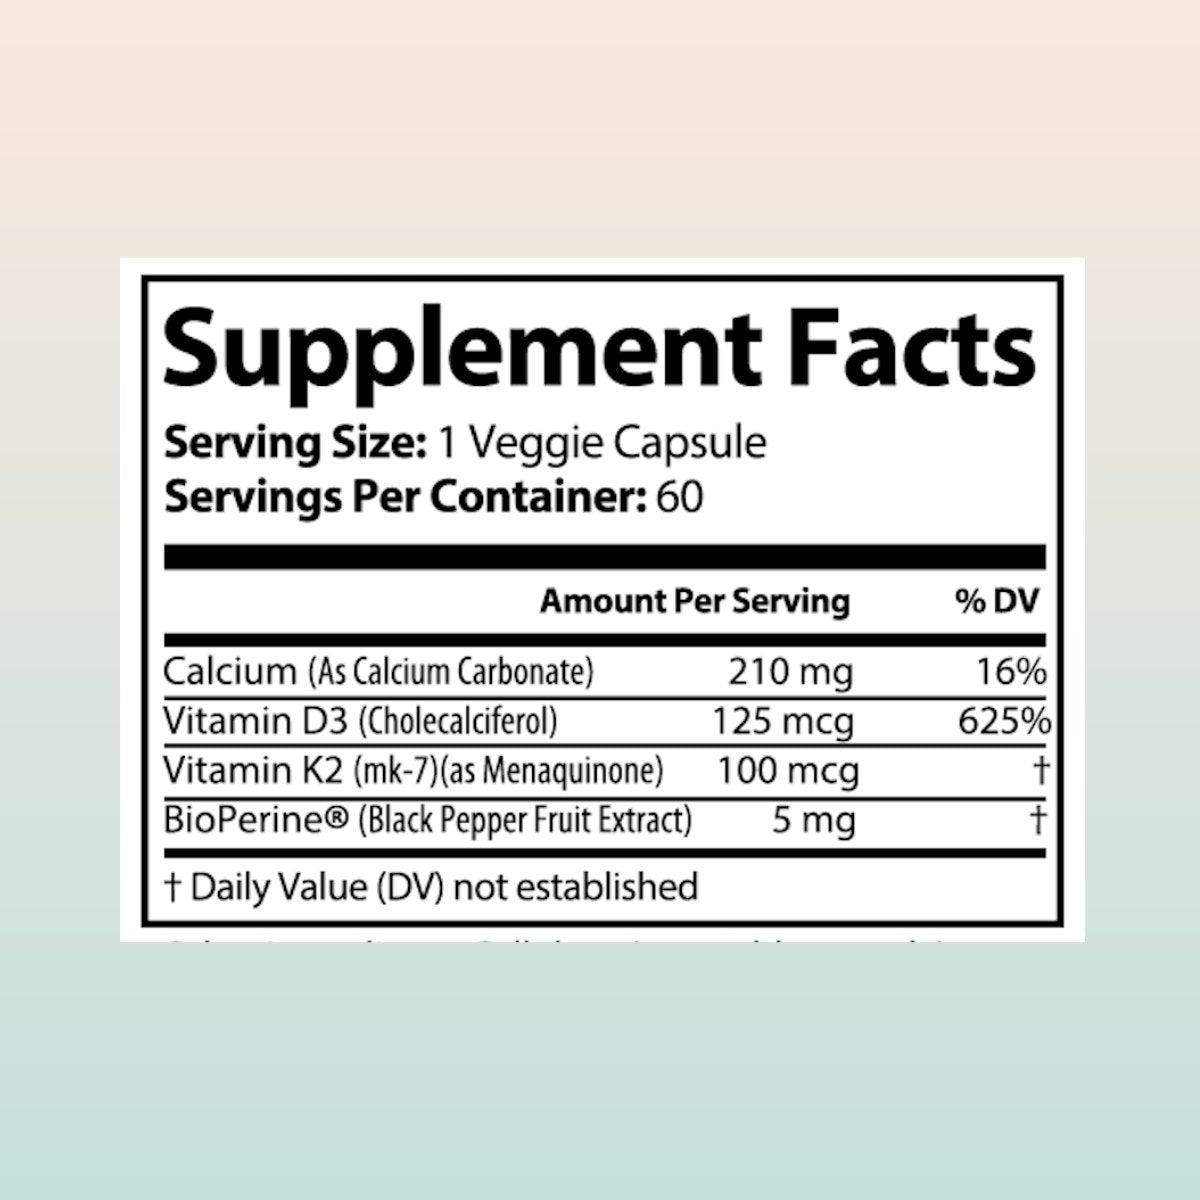 Vitamin K2 (MK7) with D3 5000 IU Supplement for Immune System | 2-Pack